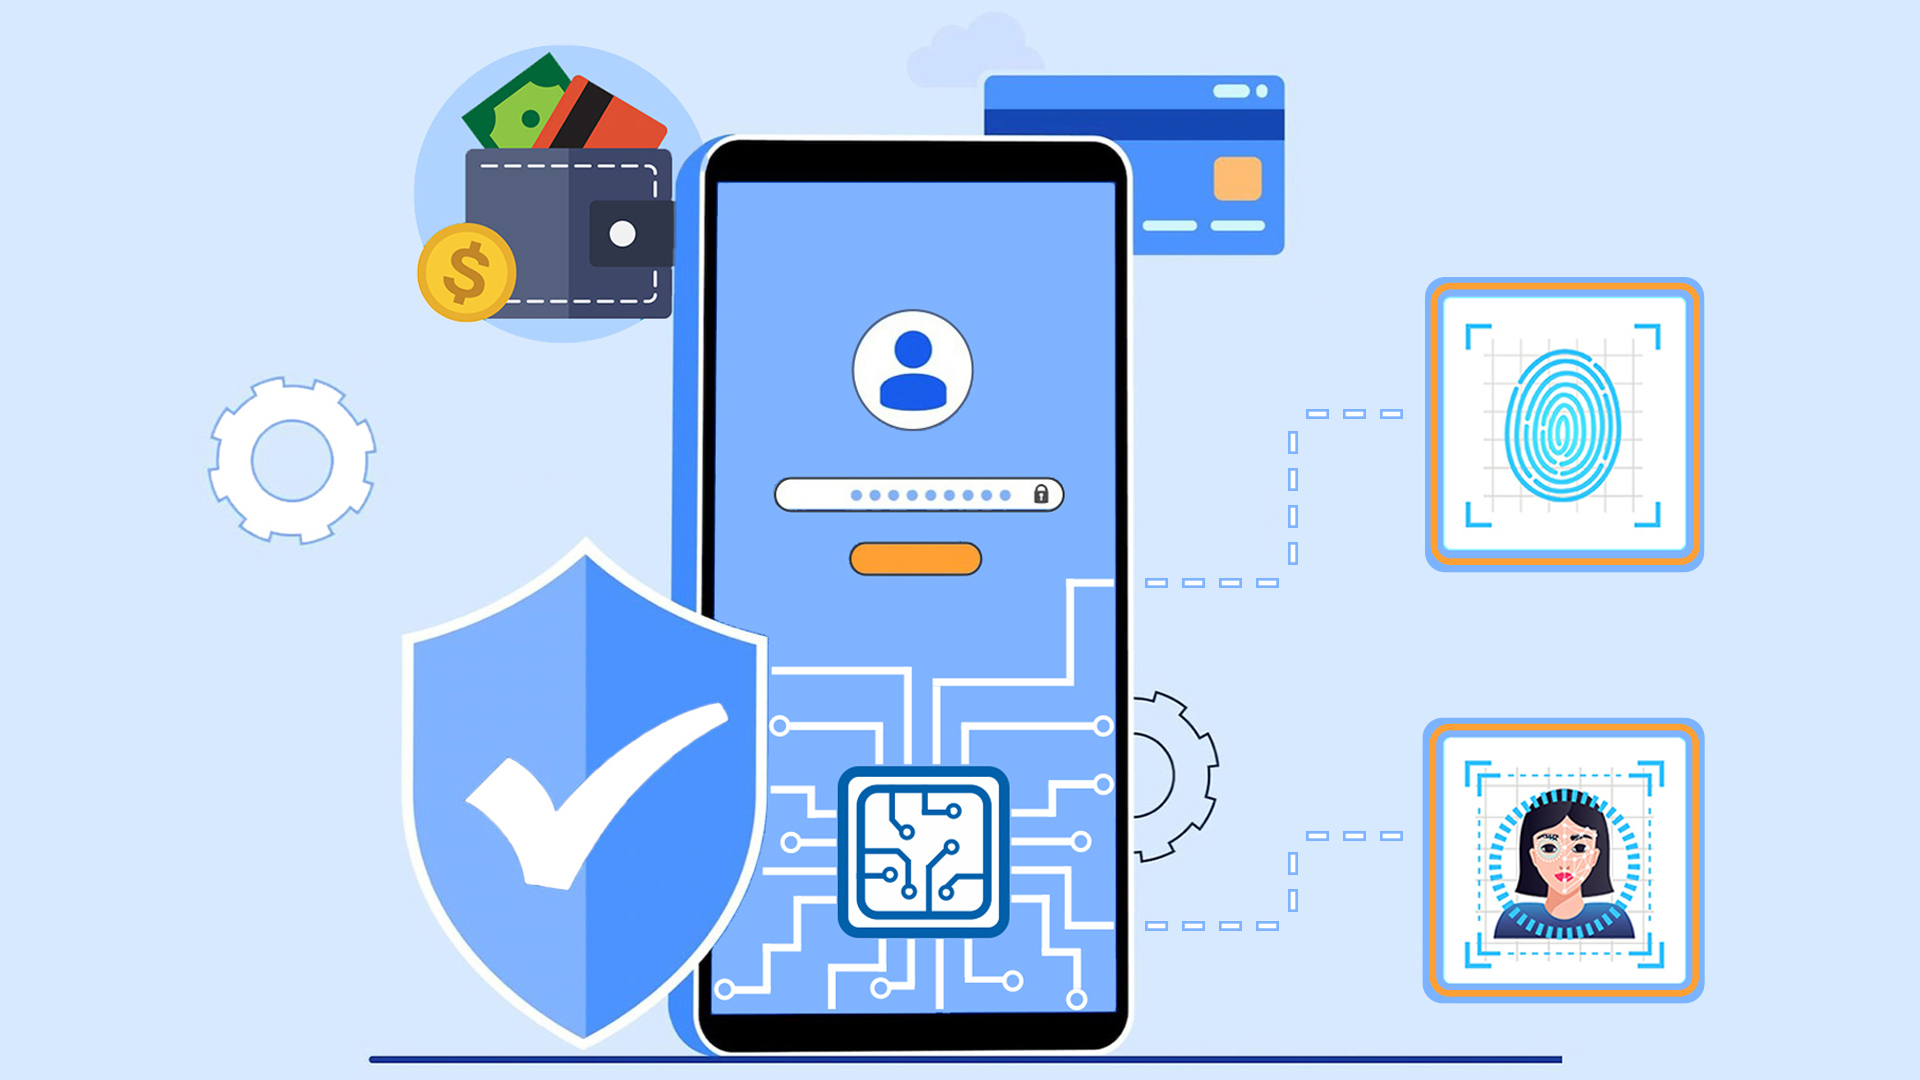 Security chip protects your data on your device